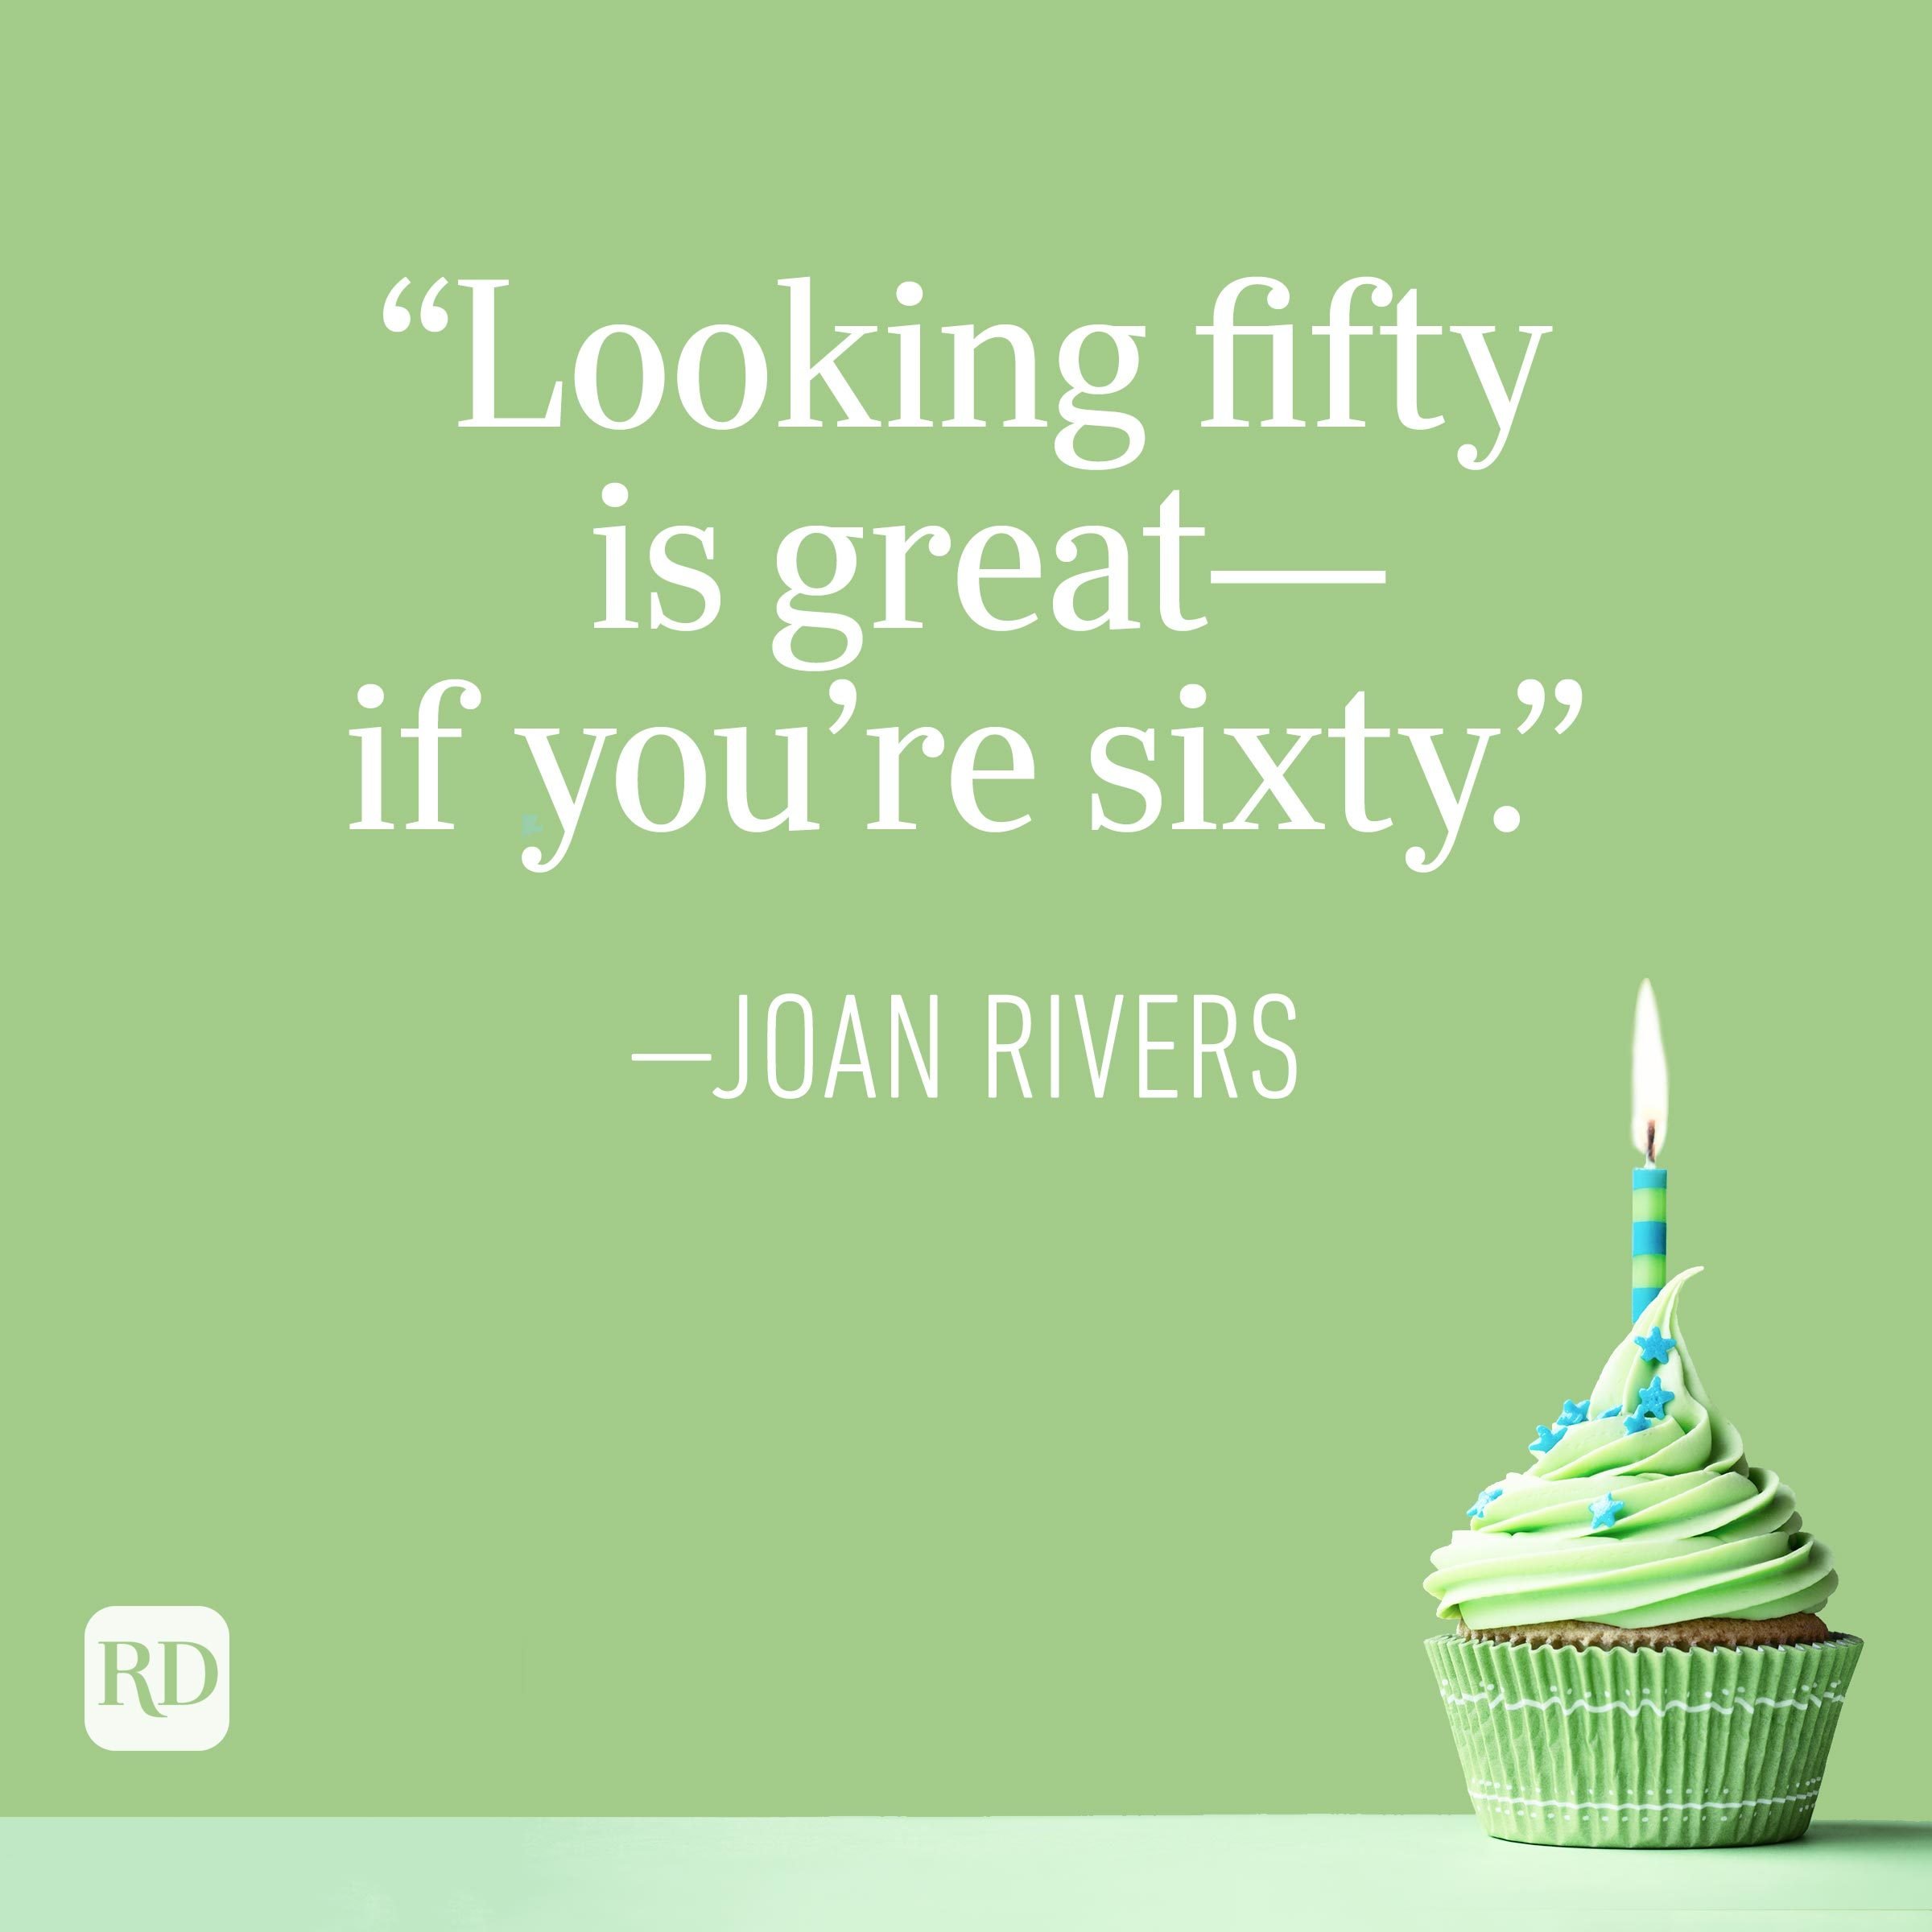 "Looking fifty is great—if you're sixty." —Joan Rivers